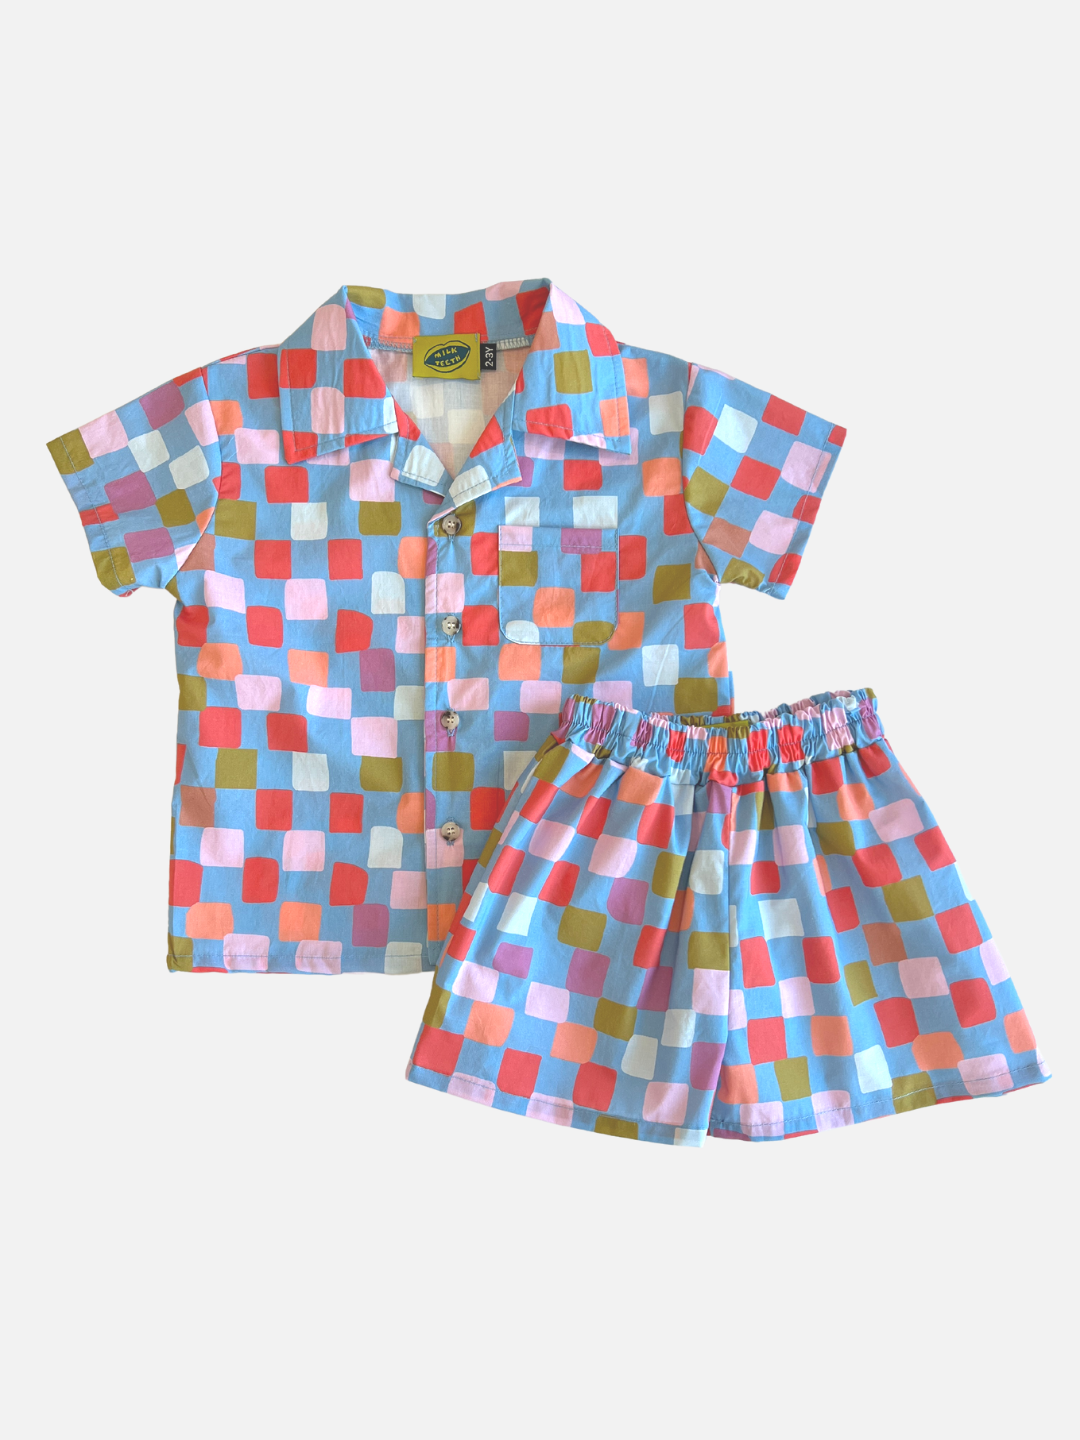 A kids' shirt and short set in a pattern of red, pink, lilac, orange and green squares on a blue background